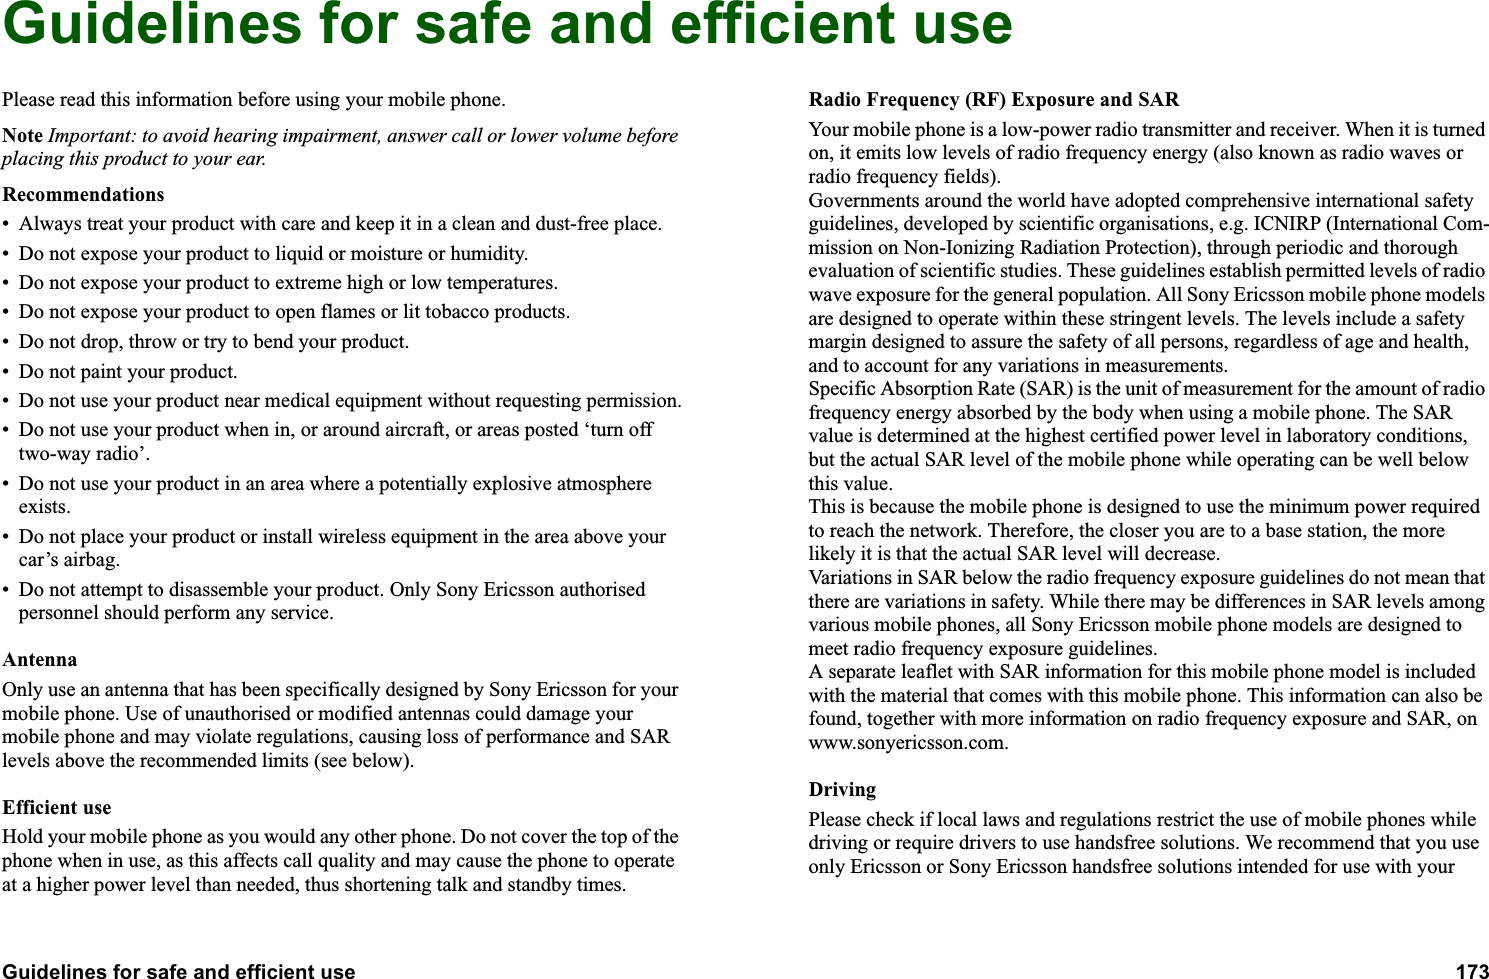 Guidelines for safe and efficient use 173  Guidelines for safe and efficient usePlease read this information before using your mobile phone.Note Important: to avoid hearing impairment, answer call or lower volume before placing this product to your ear.Recommendations• Always treat your product with care and keep it in a clean and dust-free place.• Do not expose your product to liquid or moisture or humidity.• Do not expose your product to extreme high or low temperatures.• Do not expose your product to open flames or lit tobacco products.• Do not drop, throw or try to bend your product.  • Do not paint your product.• Do not use your product near medical equipment without requesting permission.• Do not use your product when in, or around aircraft, or areas posted ‘turn off two-way radio’. • Do not use your product in an area where a potentially explosive atmosphere exists.• Do not place your product or install wireless equipment in the area above your car’s airbag.  • Do not attempt to disassemble your product. Only Sony Ericsson authorised personnel should perform any service.AntennaOnly use an antenna that has been specifically designed by Sony Ericsson for your mobile phone. Use of unauthorised or modified antennas could damage your mobile phone and may violate regulations, causing loss of performance and SAR levels above the recommended limits (see below).Efficient useHold your mobile phone as you would any other phone. Do not cover the top of the phone when in use, as this affects call quality and may cause the phone to operate at a higher power level than needed, thus shortening talk and standby times.Radio Frequency (RF) Exposure and SARYour mobile phone is a low-power radio transmitter and receiver. When it is turned on, it emits low levels of radio frequency energy (also known as radio waves or radio frequency fields). Governments around the world have adopted comprehensive international safety guidelines, developed by scientific organisations, e.g. ICNIRP (International Com-mission on Non-Ionizing Radiation Protection), through periodic and thorough evaluation of scientific studies. These guidelines establish permitted levels of radio wave exposure for the general population. All Sony Ericsson mobile phone models are designed to operate within these stringent levels. The levels include a safety margin designed to assure the safety of all persons, regardless of age and health, and to account for any variations in measurements.Specific Absorption Rate (SAR) is the unit of measurement for the amount of radio frequency energy absorbed by the body when using a mobile phone. The SAR value is determined at the highest certified power level in laboratory conditions, but the actual SAR level of the mobile phone while operating can be well below this value. This is because the mobile phone is designed to use the minimum power required to reach the network. Therefore, the closer you are to a base station, the more likely it is that the actual SAR level will decrease.Variations in SAR below the radio frequency exposure guidelines do not mean that there are variations in safety. While there may be differences in SAR levels among various mobile phones, all Sony Ericsson mobile phone models are designed to meet radio frequency exposure guidelines.A separate leaflet with SAR information for this mobile phone model is included with the material that comes with this mobile phone. This information can also be found, together with more information on radio frequency exposure and SAR, on www.sonyericsson.com.DrivingPlease check if local laws and regulations restrict the use of mobile phones while driving or require drivers to use handsfree solutions. We recommend that you use only Ericsson or Sony Ericsson handsfree solutions intended for use with your 